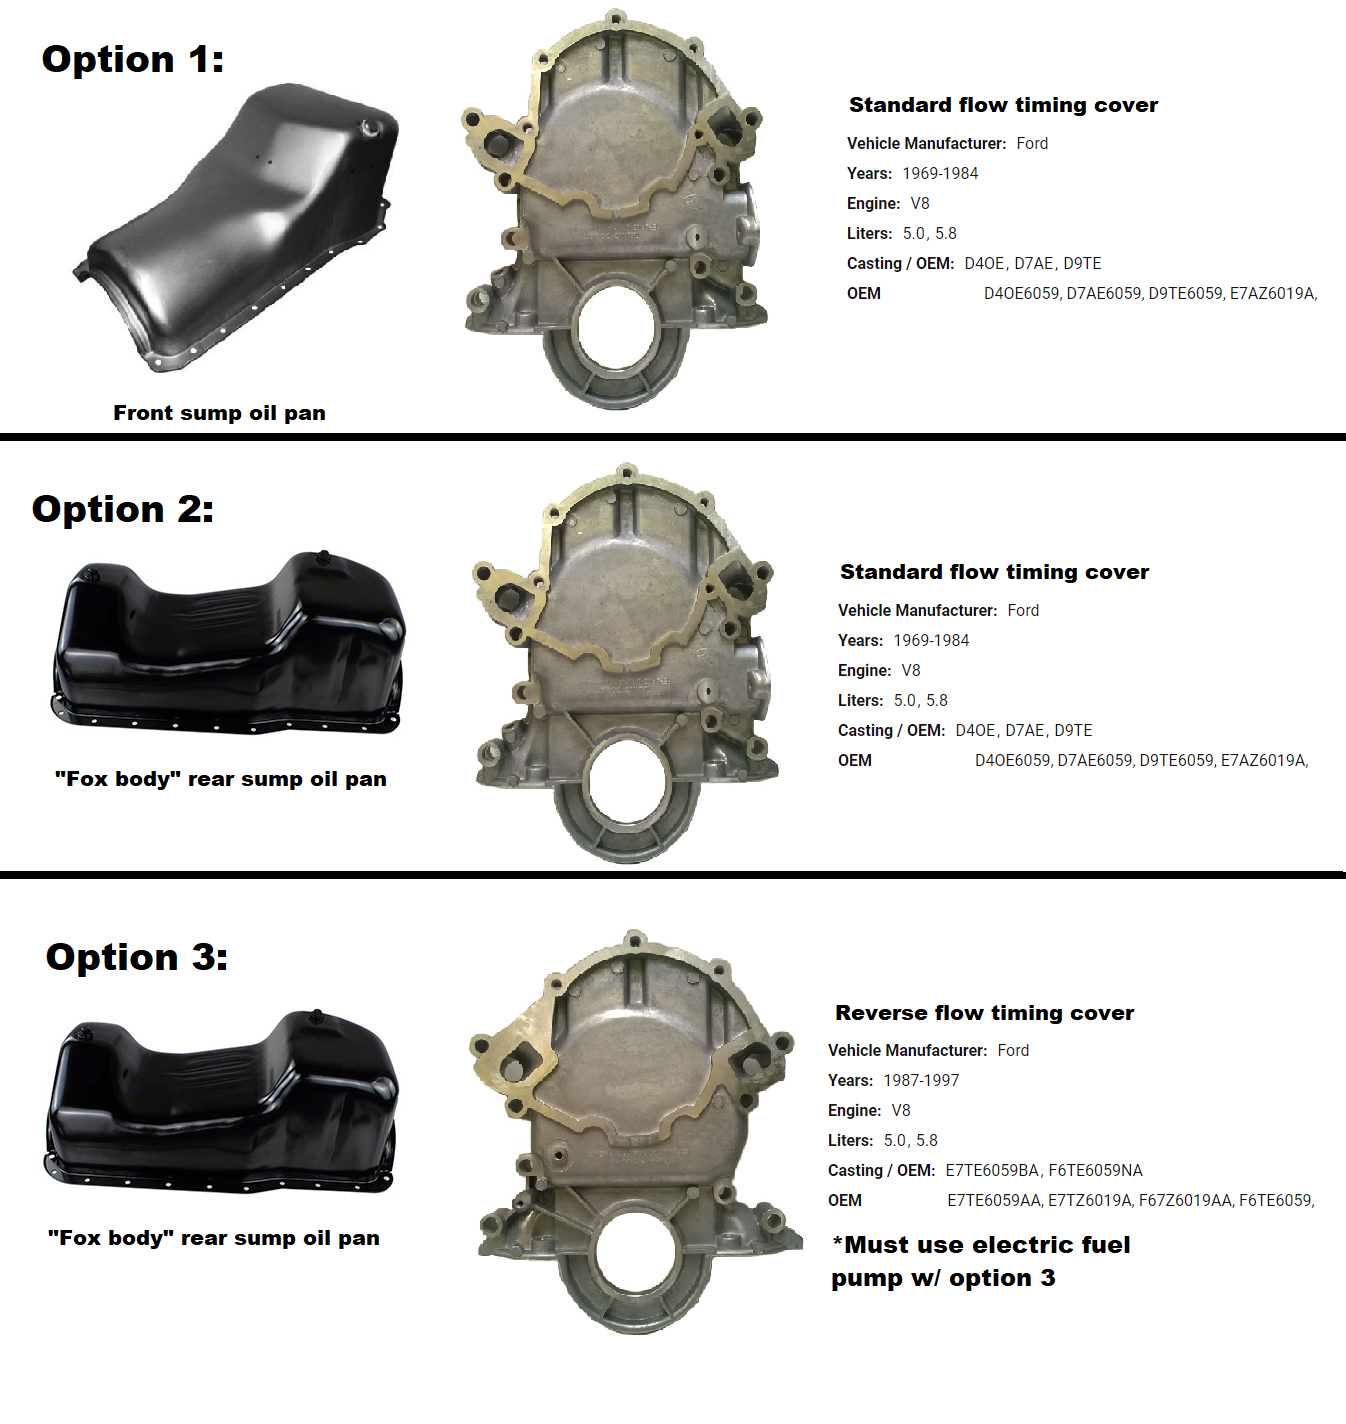 Ford timing cover/oil pan options